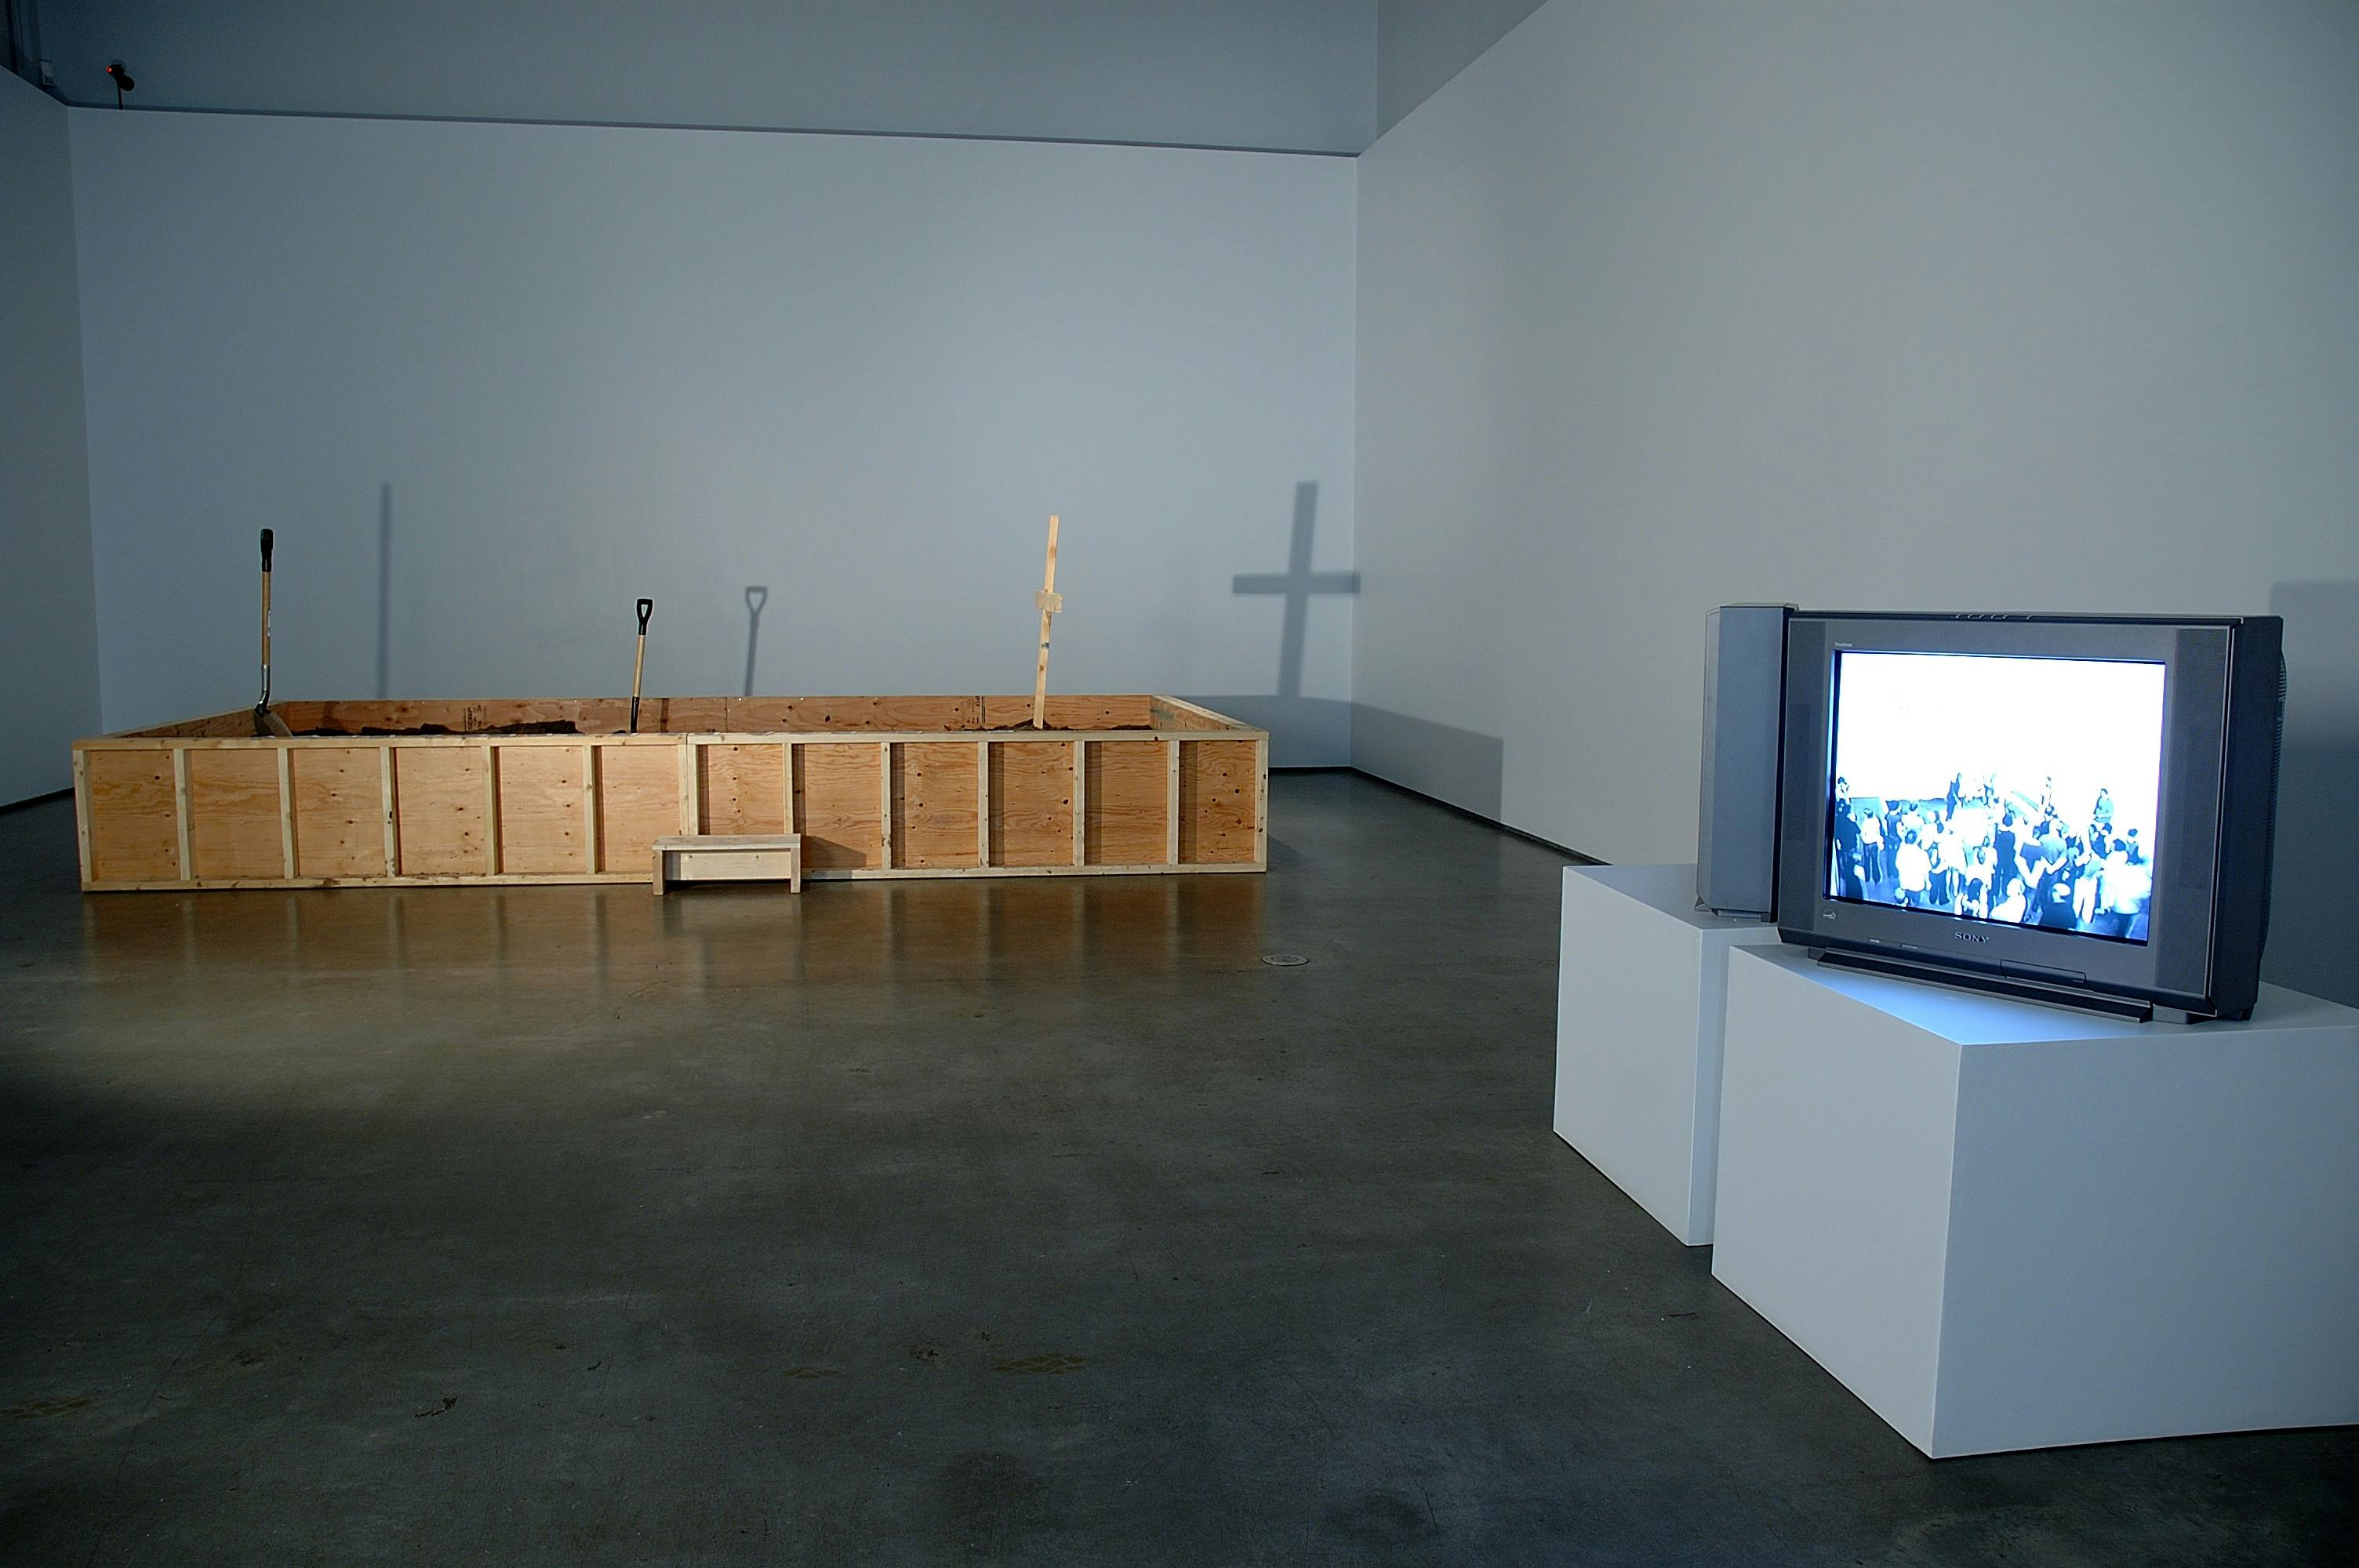 An installation image of several artworks in a gallery. A large unsealed wood box is placed on the floor near the far wall. A CRT TV placed on the pedestal shows the image of an assembly of people.